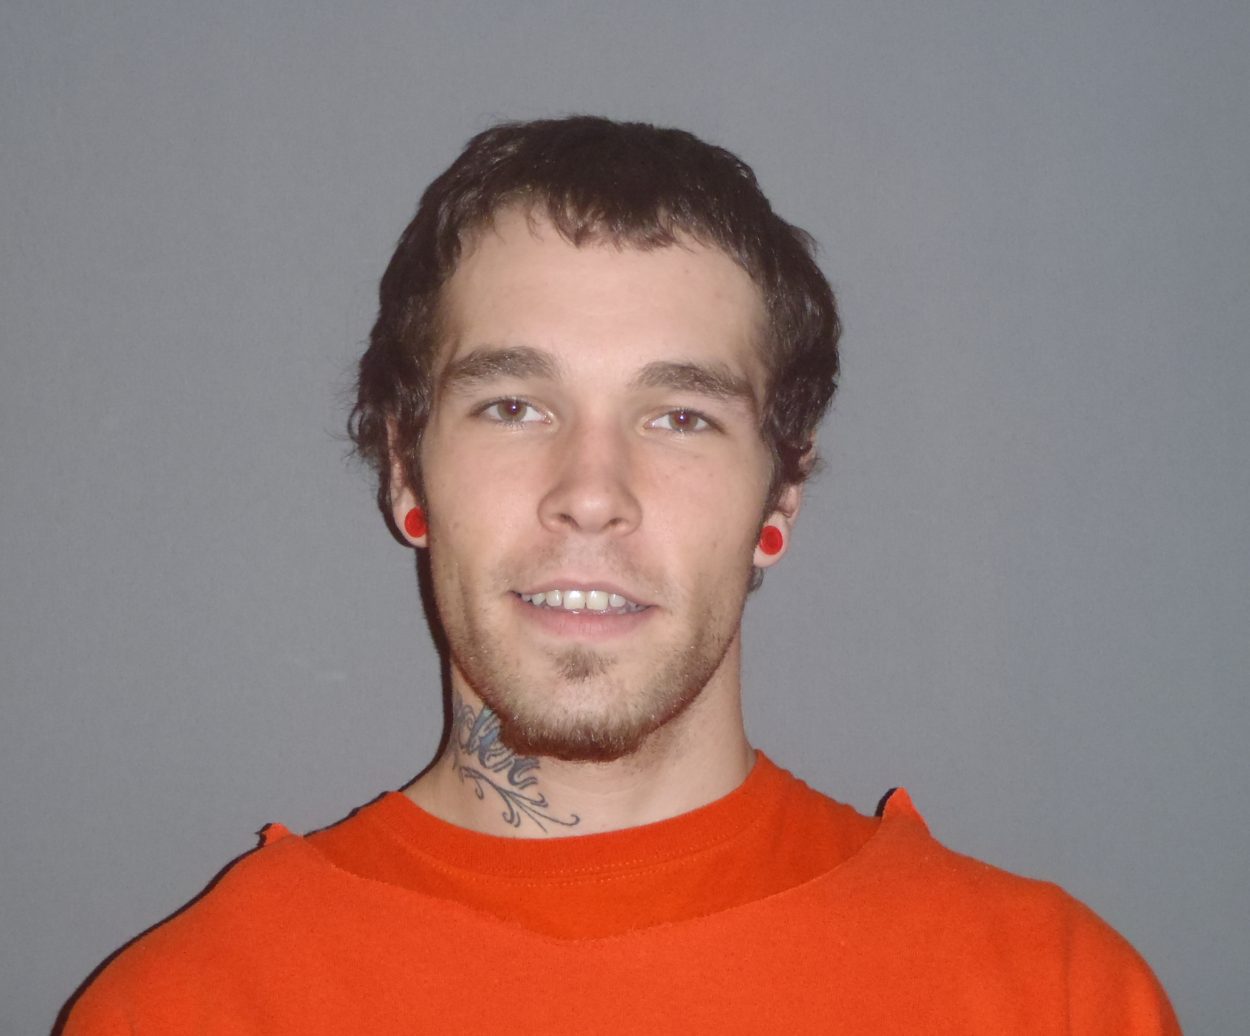 Petersburg police arrest escaped inmate